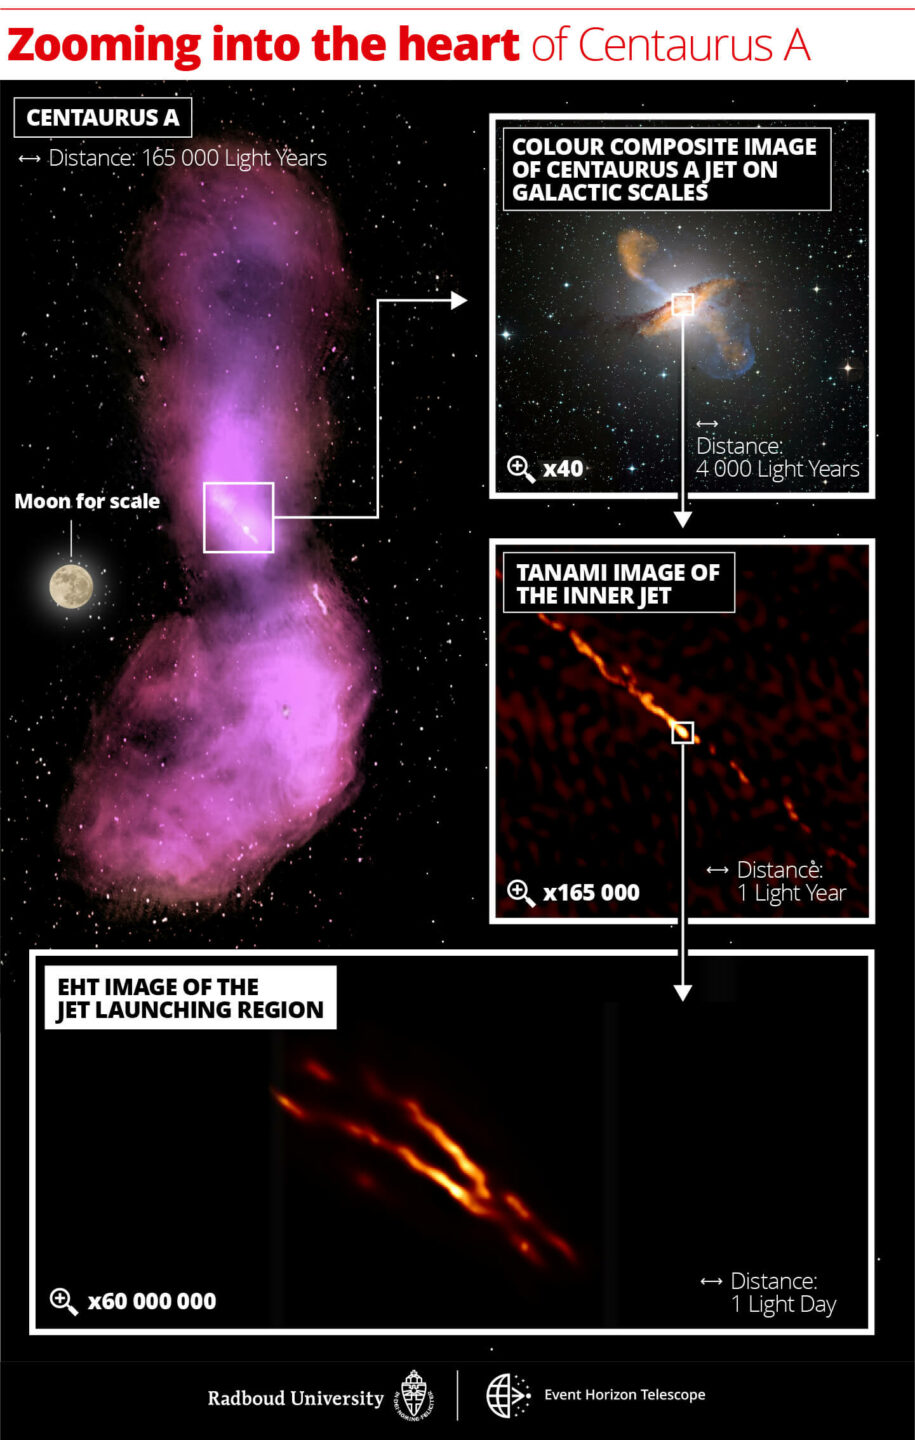 An info graphic showing how the images zoomed into the galaxy to find the jets